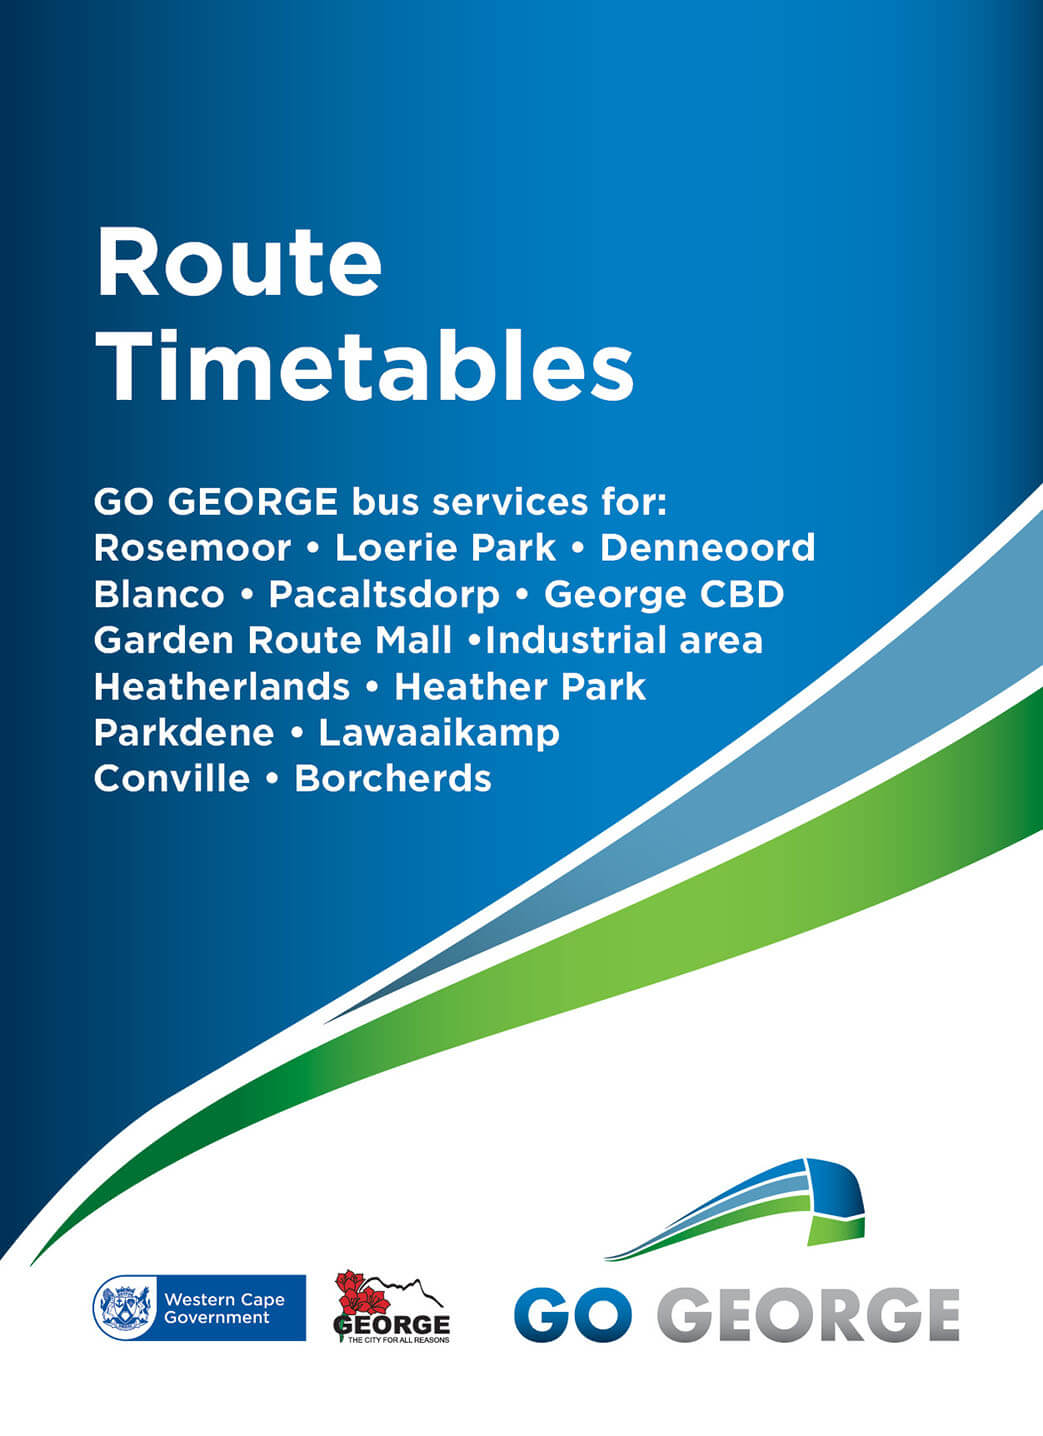 Thumbnail to be clicked on to download the Route Timetables for Rosemoor, Loerie Park, Denneoord, Blanco, Pacaltsdorp, George CBD, Garden Route Mall, Industrial Area, Heatherlands, Heather Park, Parkdene, Lawaaikamp, Conville and Borcherds.